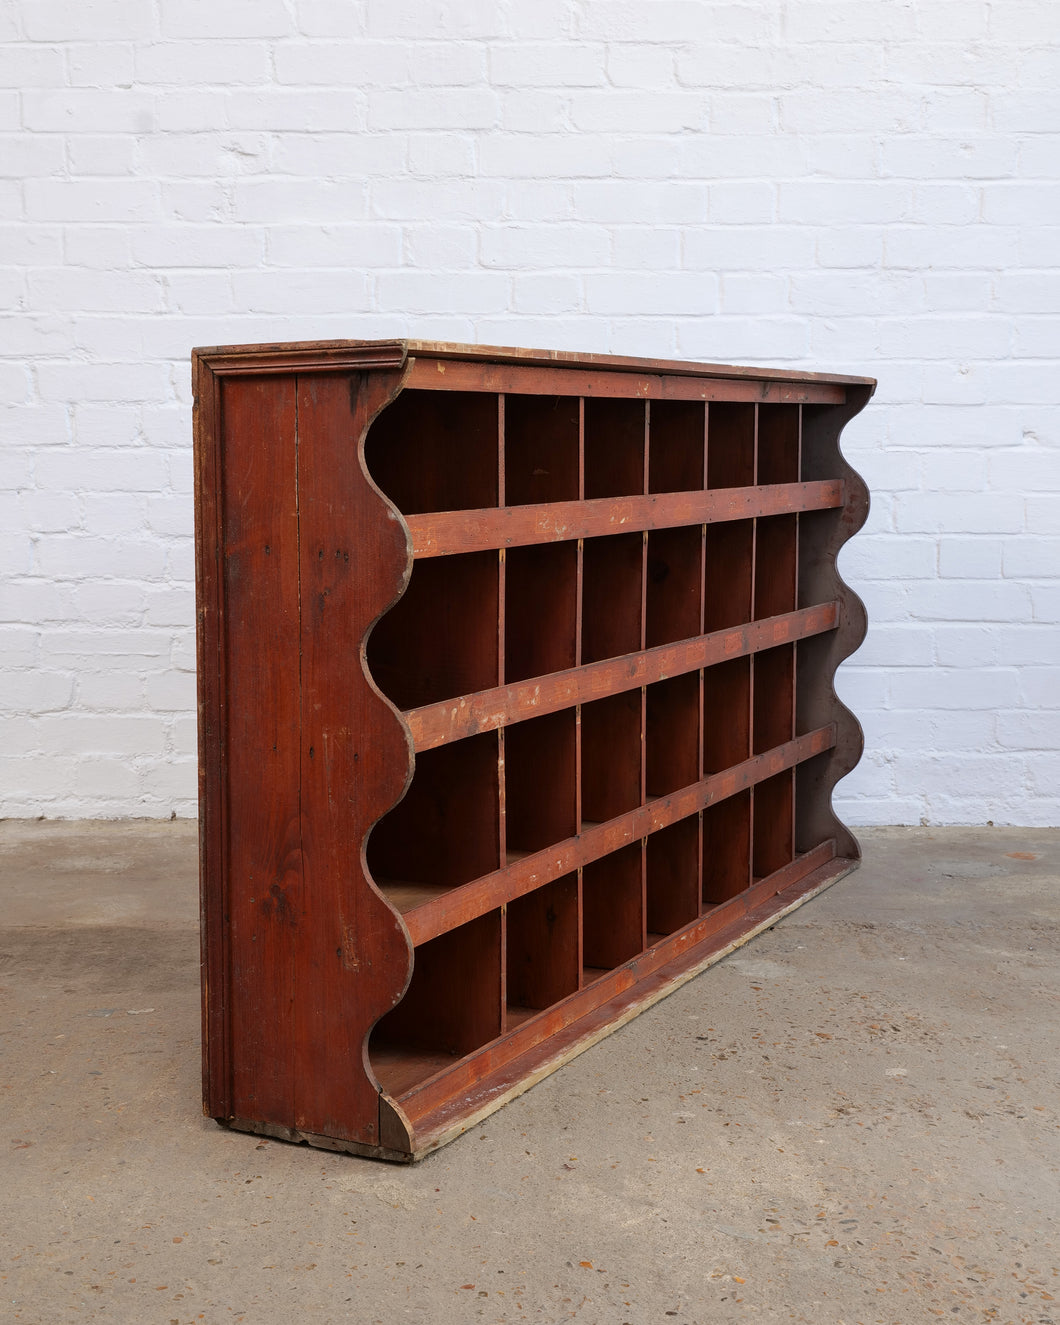 French Apothecary Pigeon-hole Shelving Unit